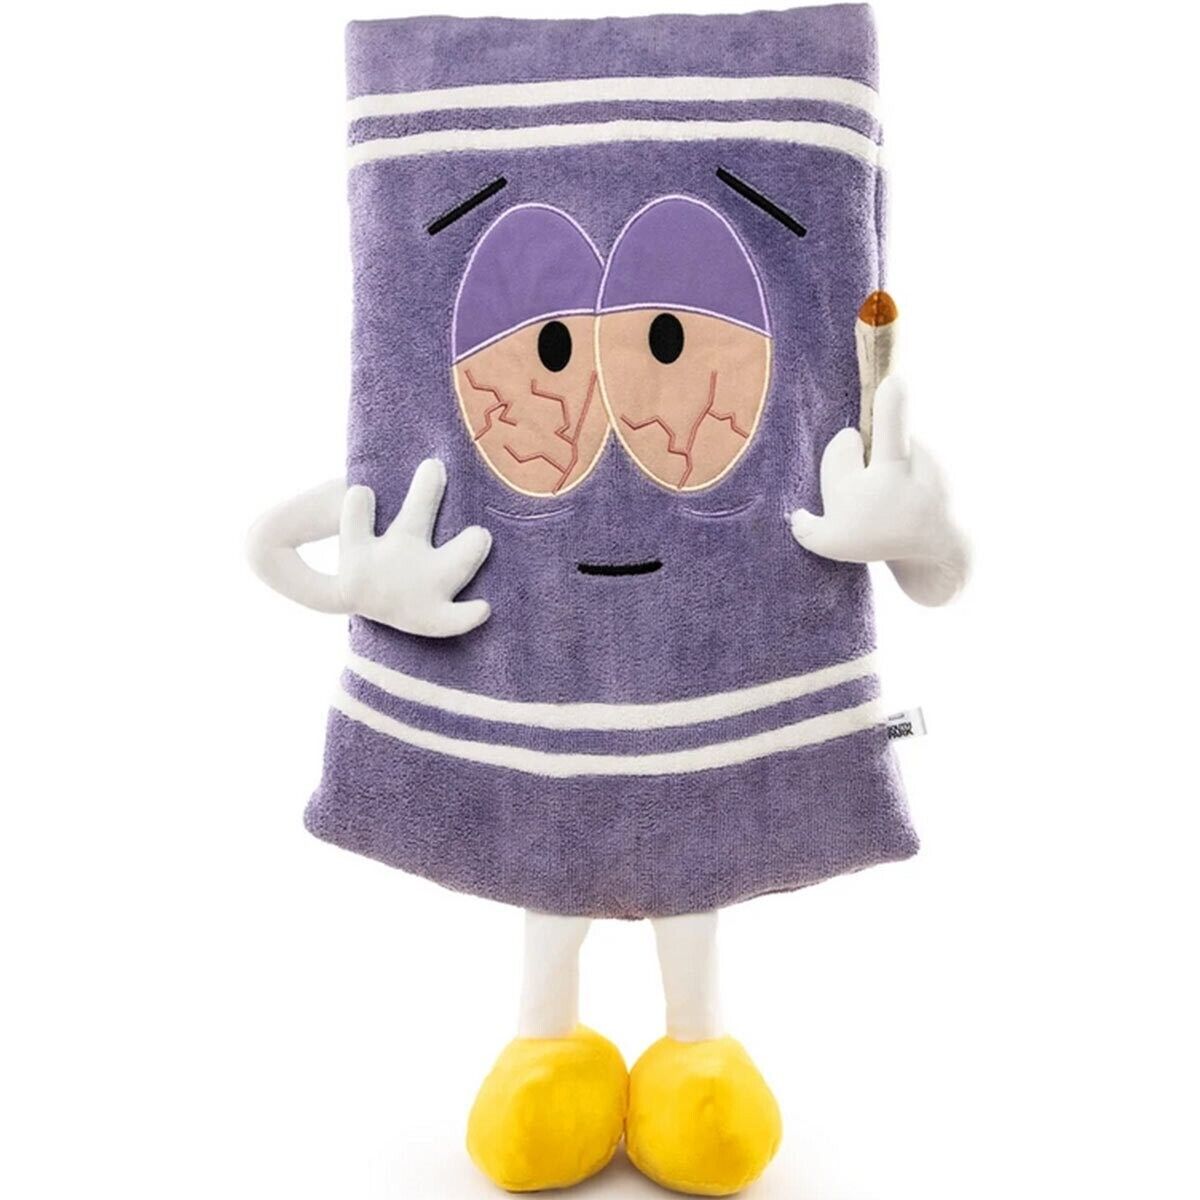 KIDROBOT SOUTH PARK STONED TOWELIE plush 24 Inch. NEW, IN STOCK